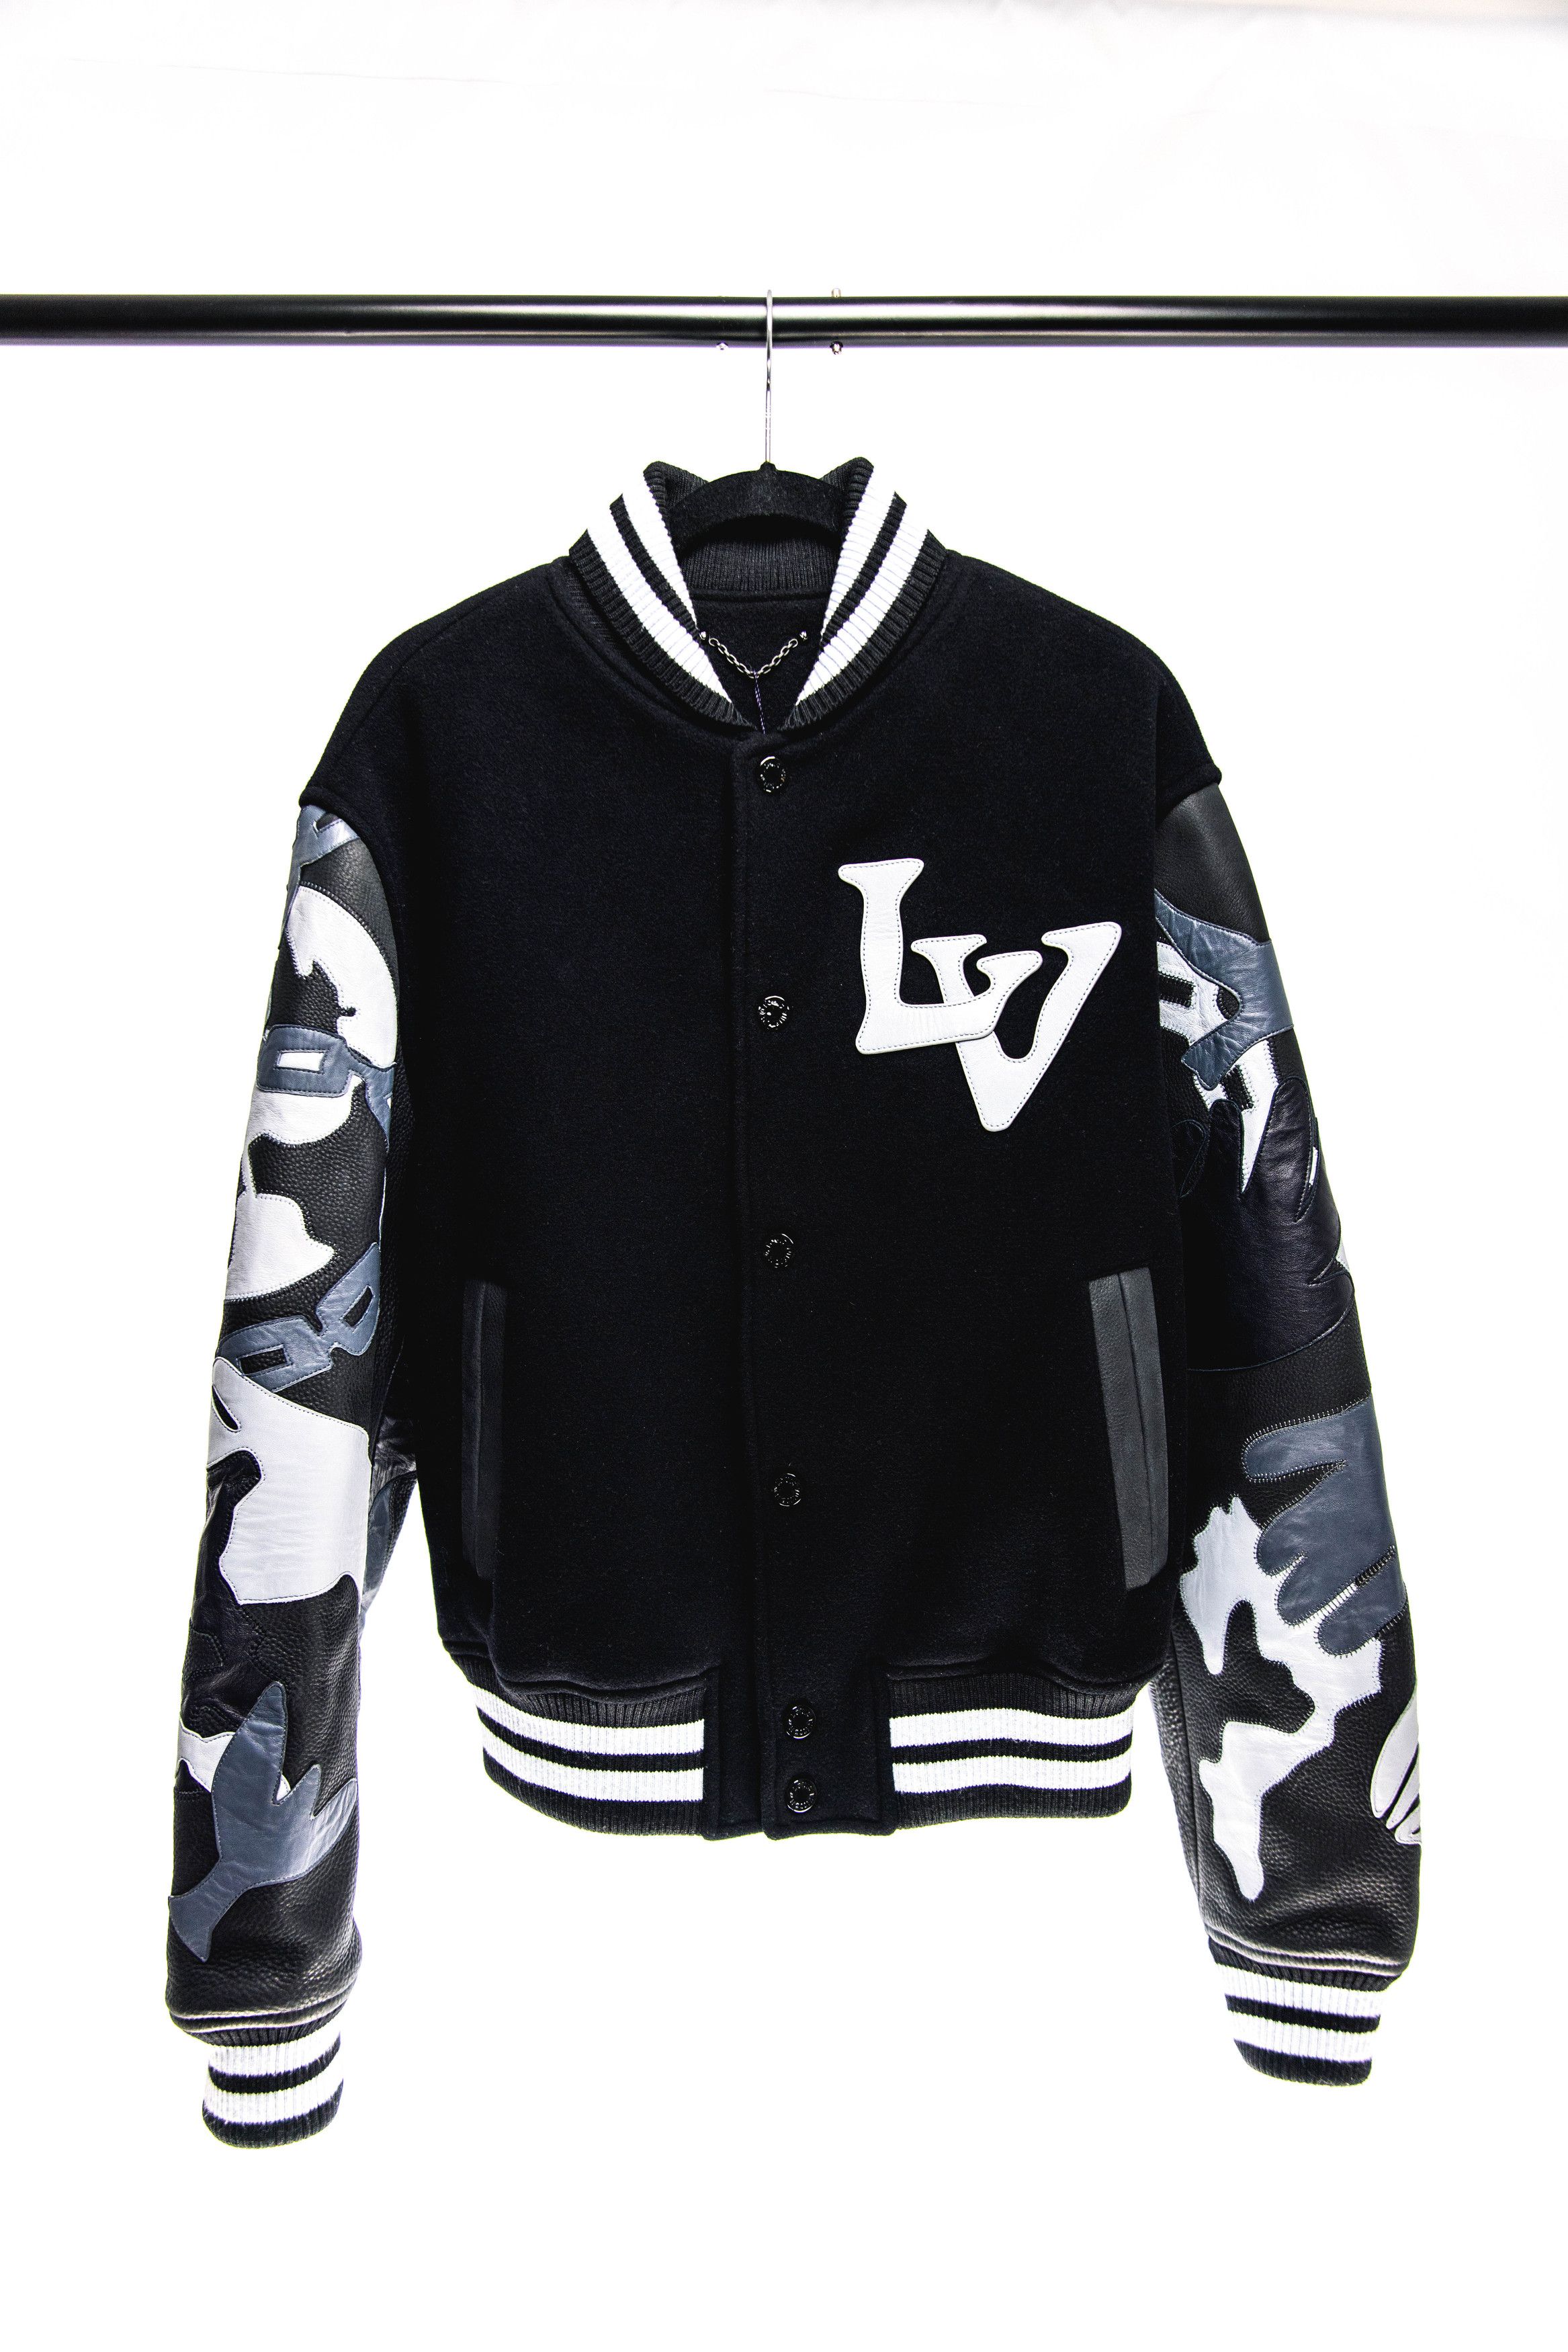 Louis Vuitton Chains Camo Varsity Jacket, Black, 46 Stock Confirmation Required